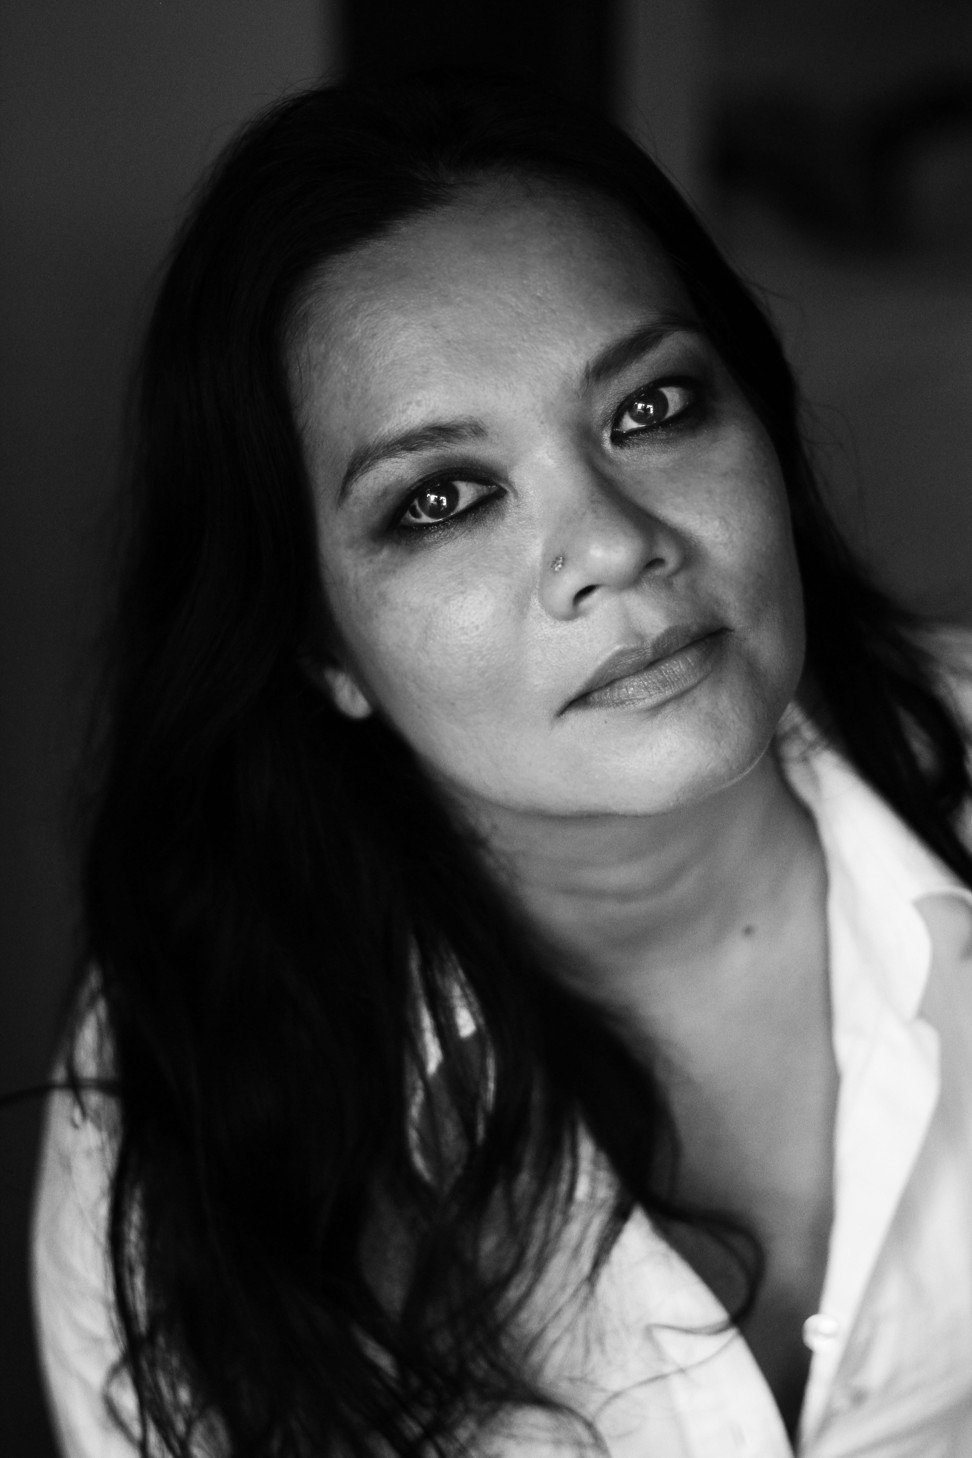 Author Bernice Chauly is a former journalist.